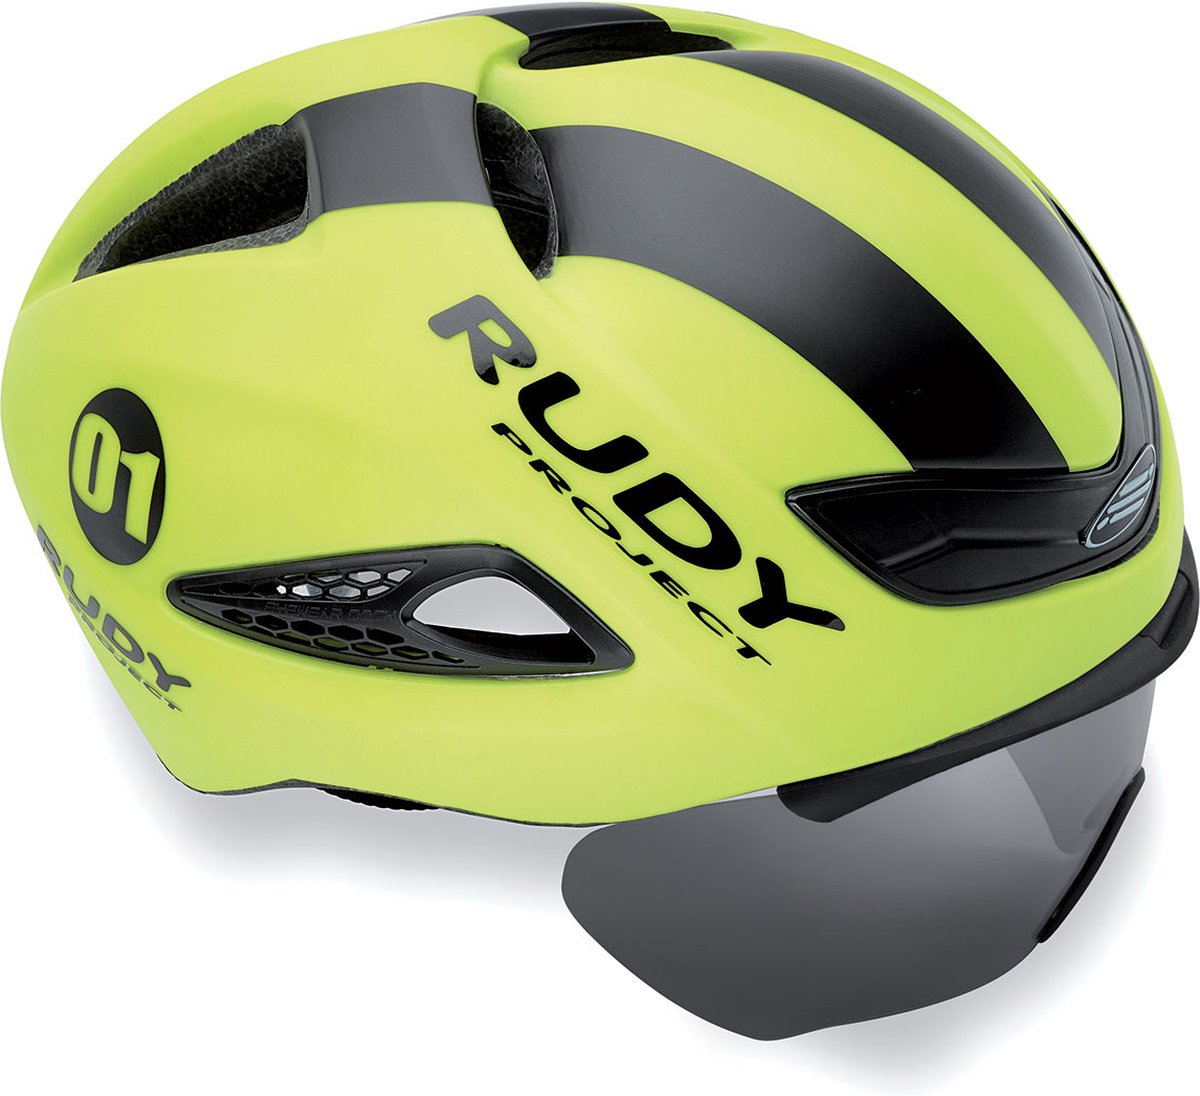 Rudy Project Helmet Boost 01-Yellow Fluo-Black Matte-With Removable Opt. Shield -S-M 54-58- Helm